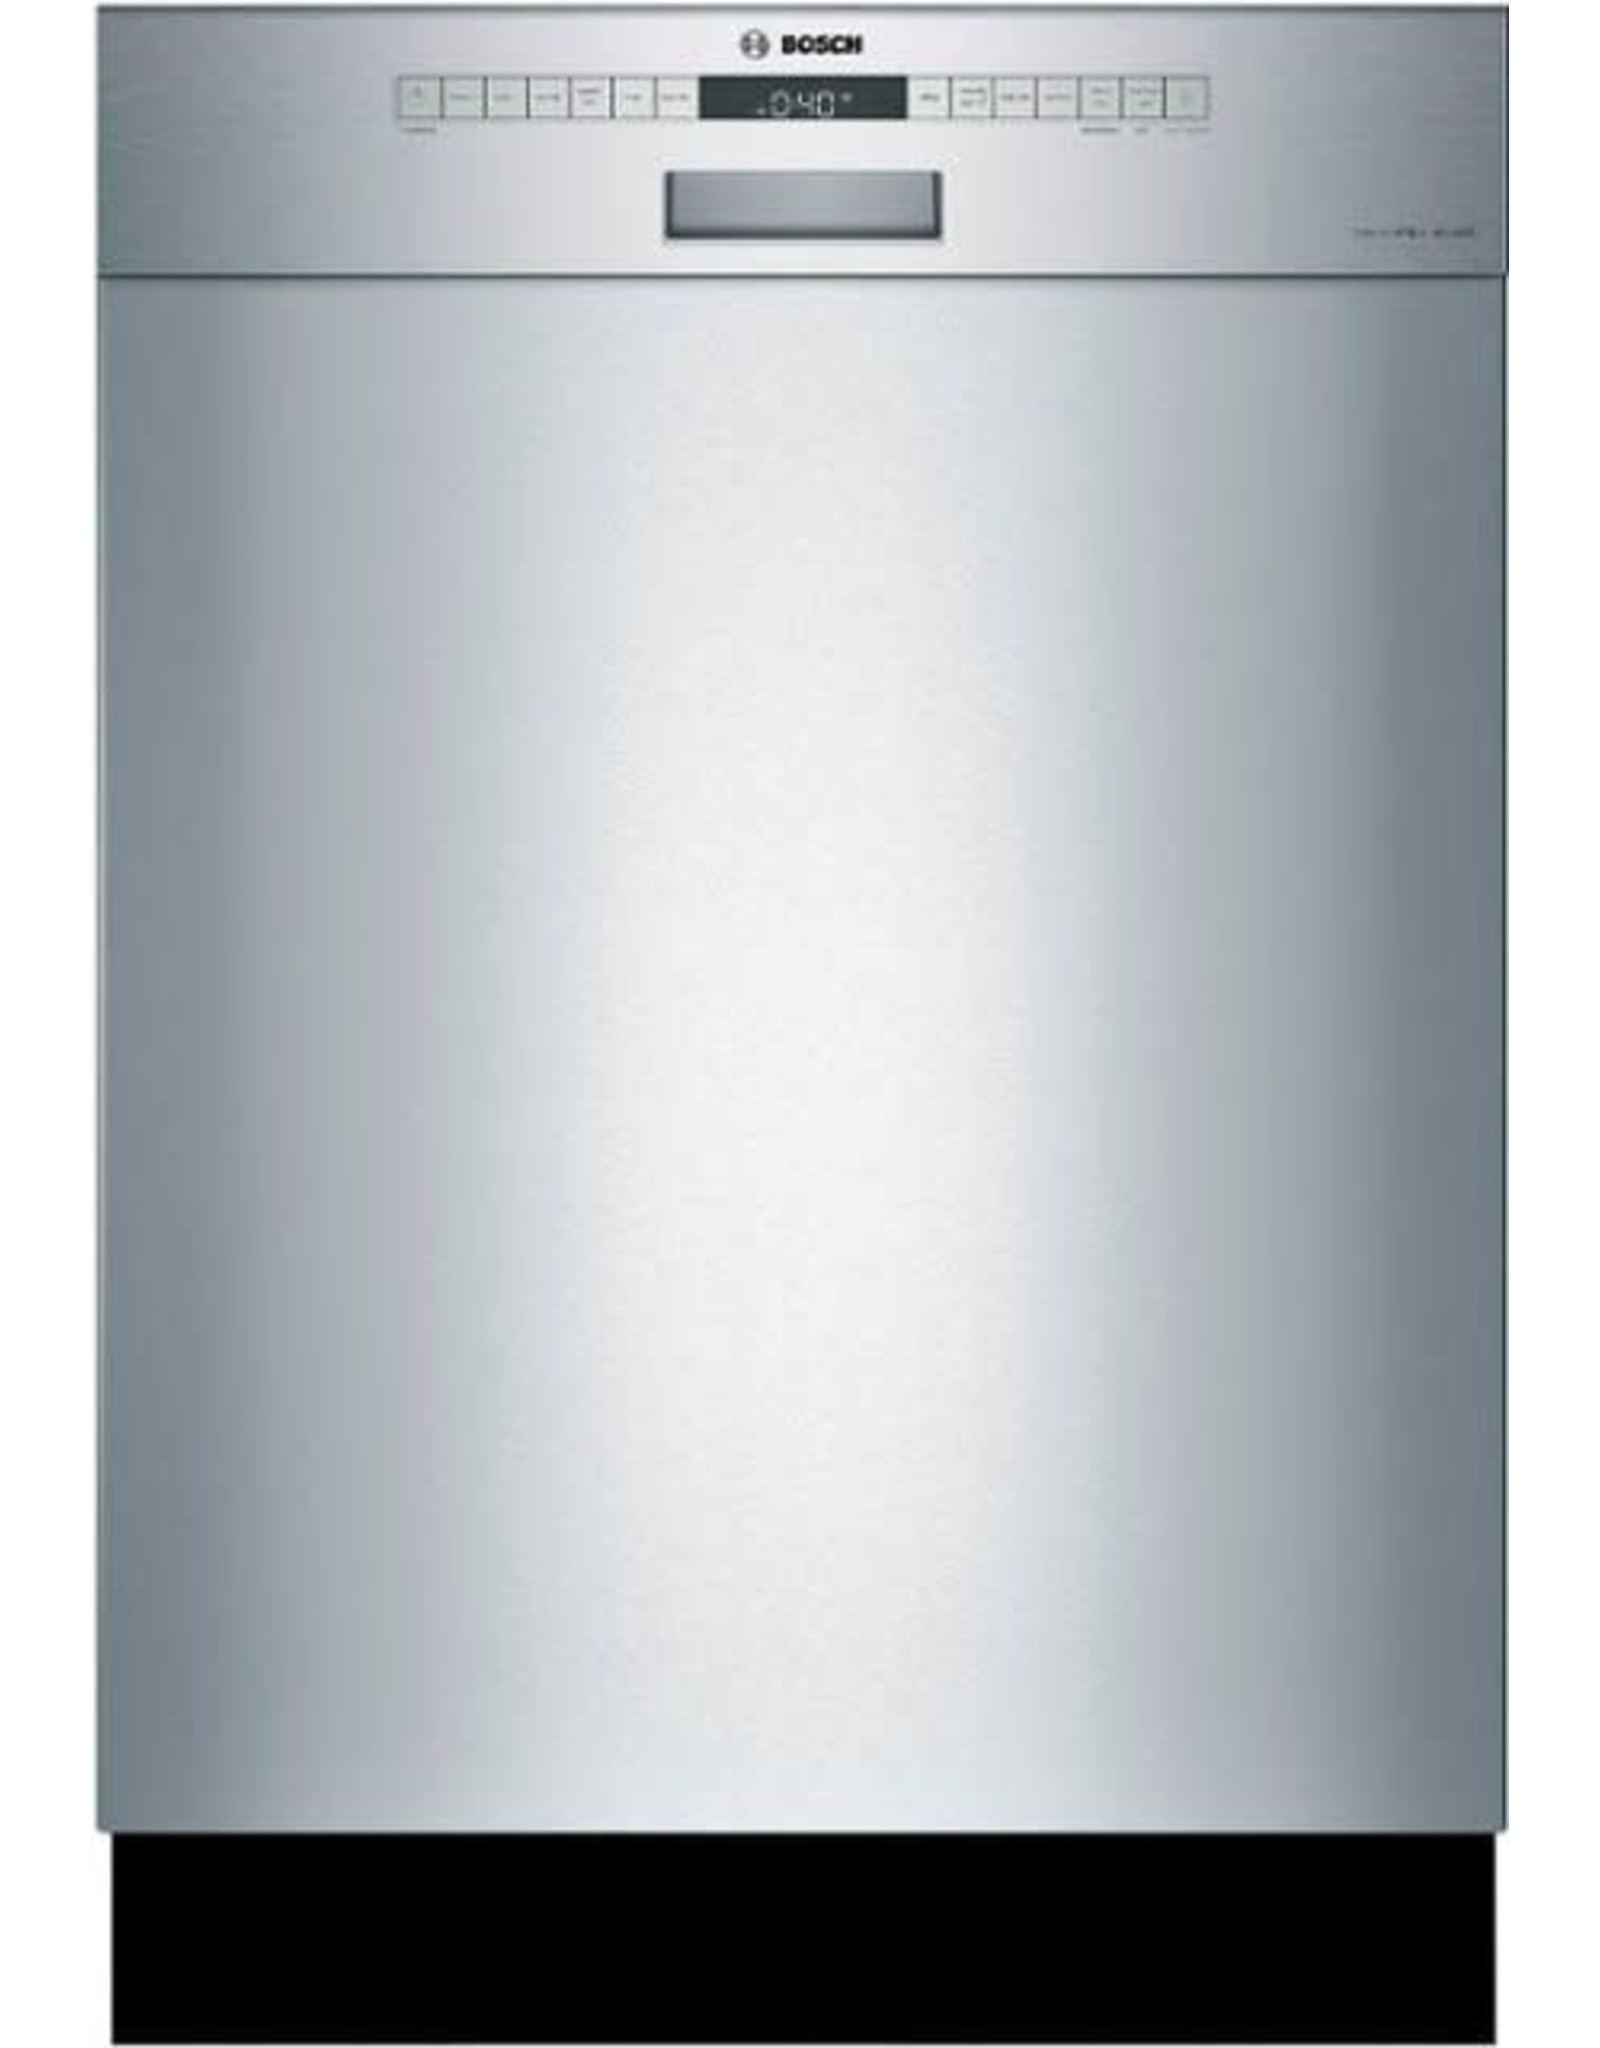 BOSCH Bosch 300 Series Top Control 24-in Built-In Dishwasher (Stainless Steel) ENERGY STAR, 48-dBA